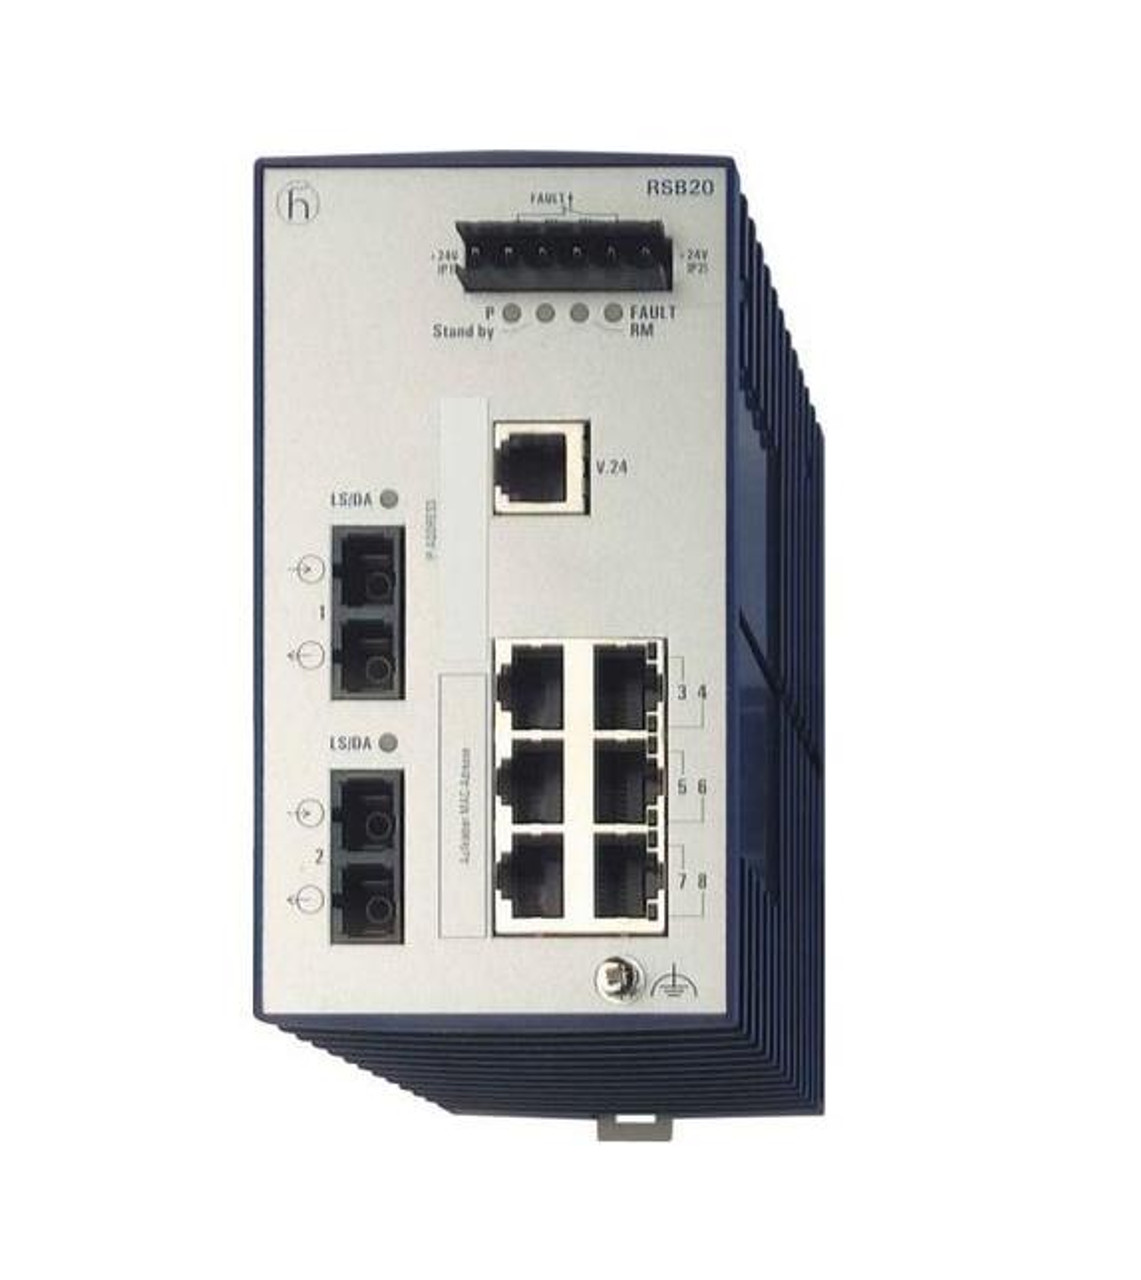 Hirschmann Mananaged Industrial Ethernet Rail Switch with 6 RJ45 Fast (100 Mbps) Copper Ports and 2 Fast (10/100) Fiber Single mode port with SC